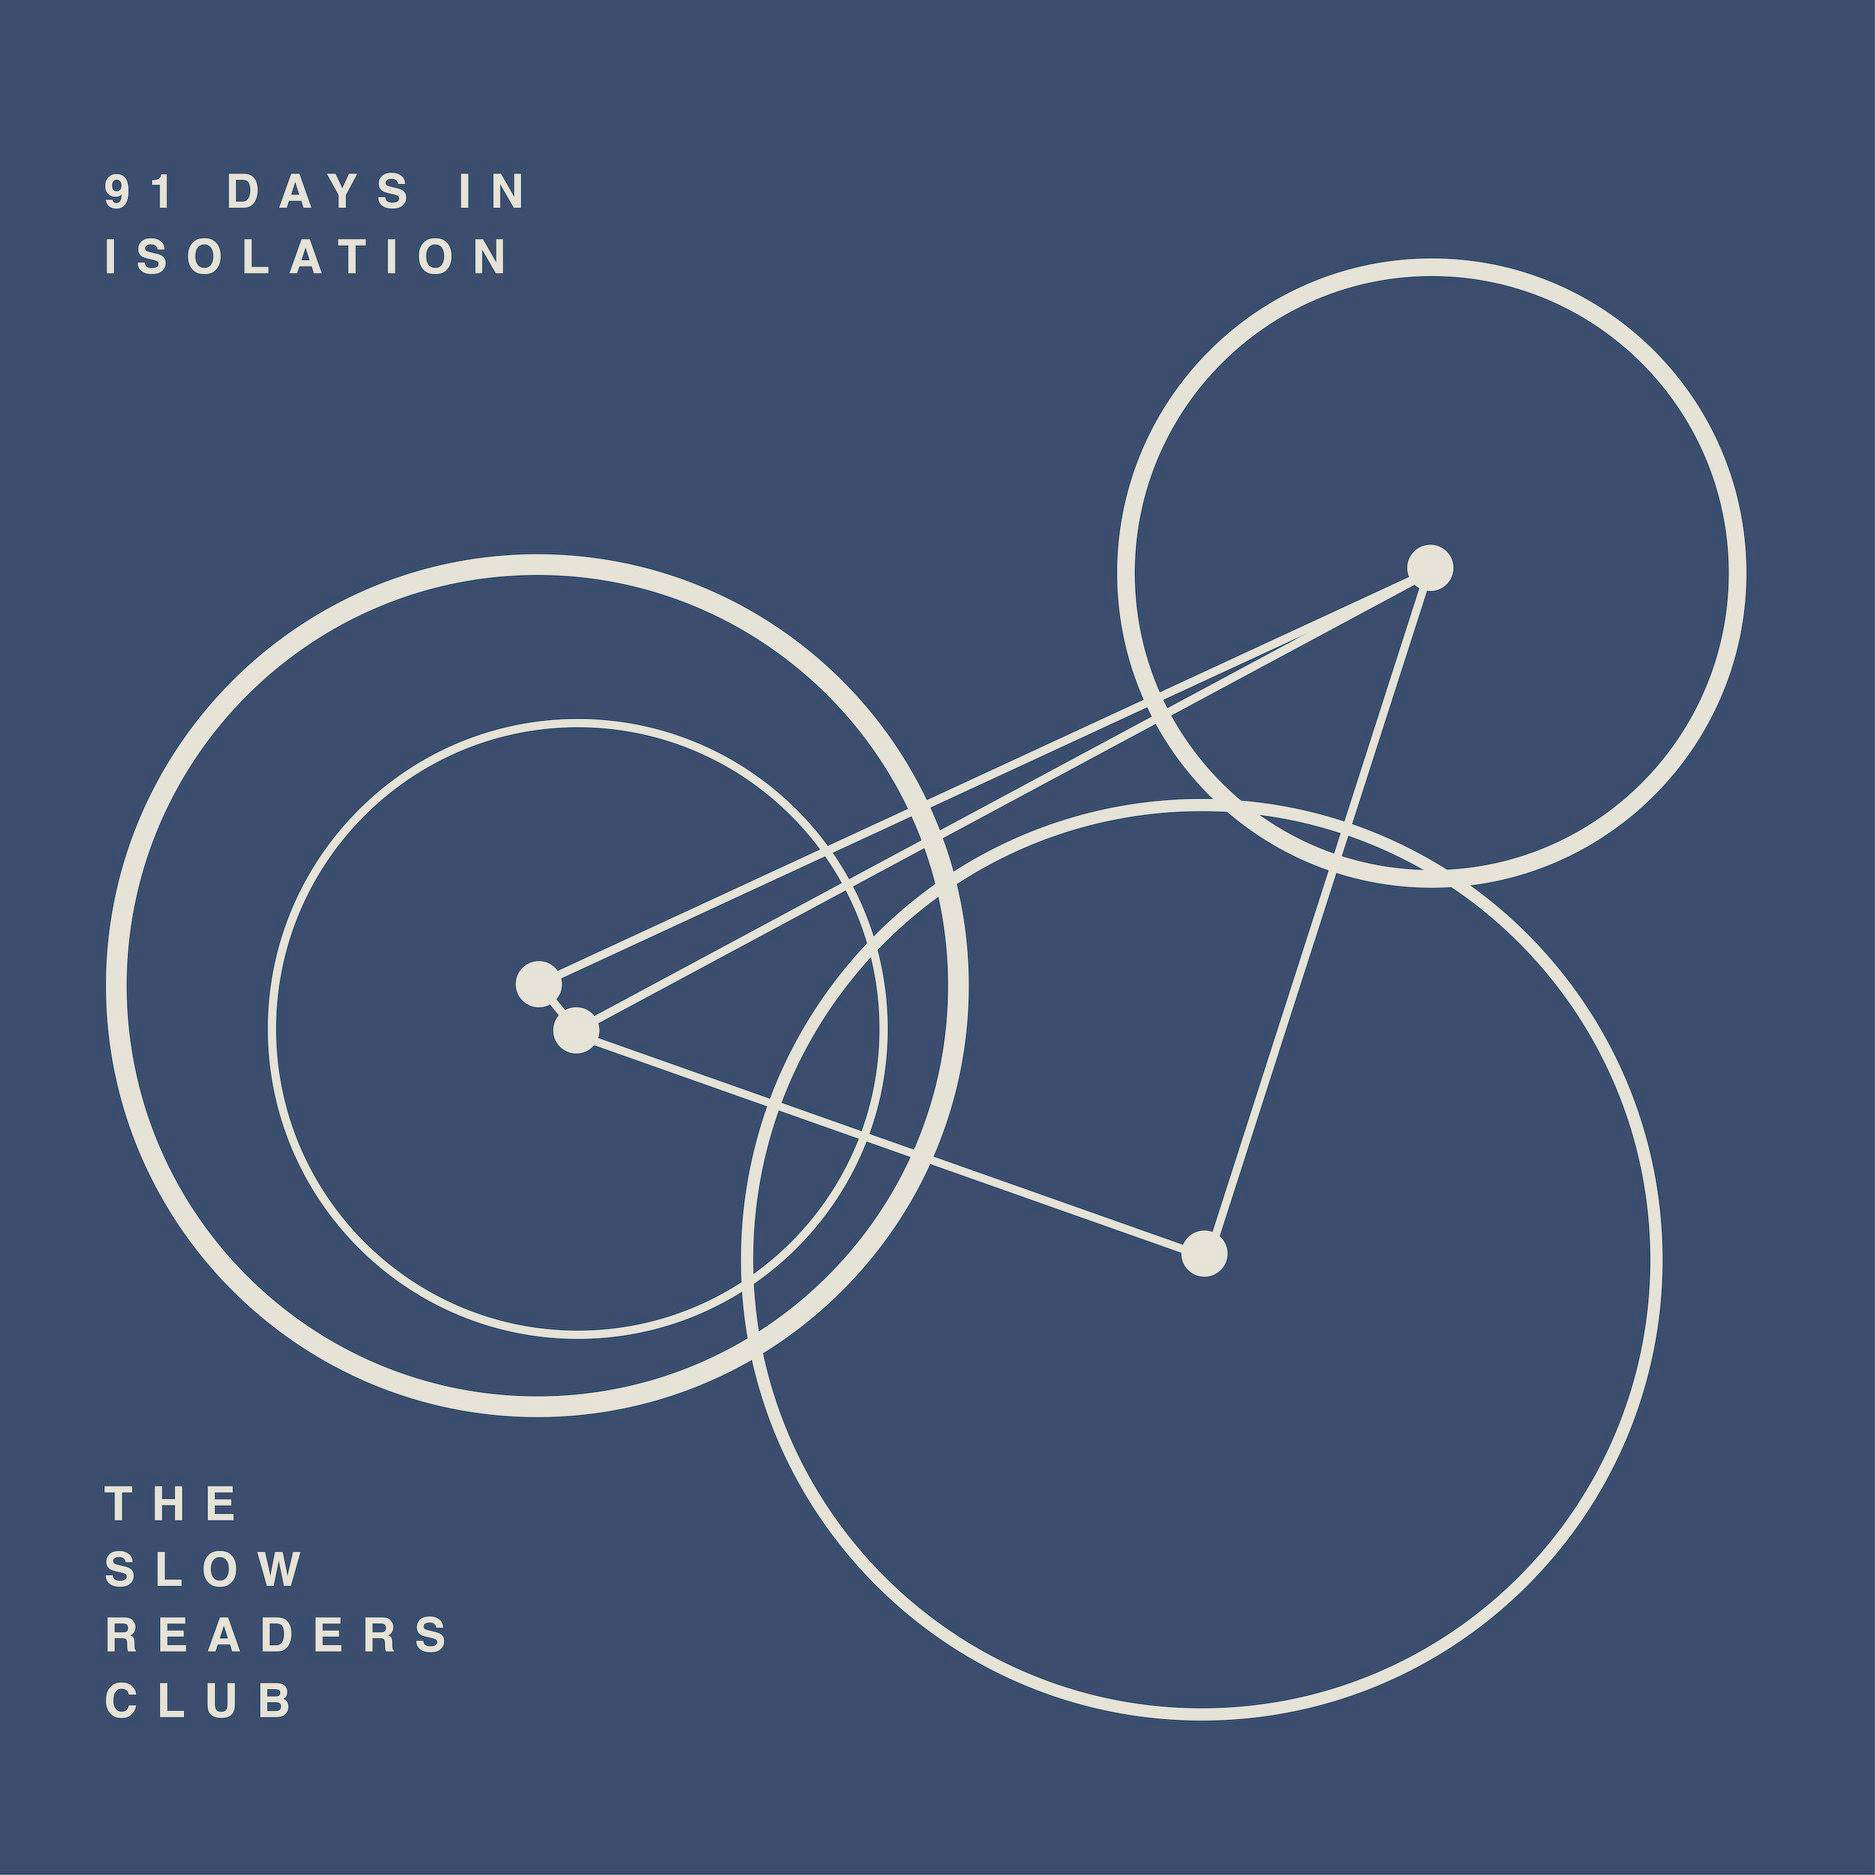 ALBUM REVIEW: The Slow Readers Club - 91 Days In Isolation 